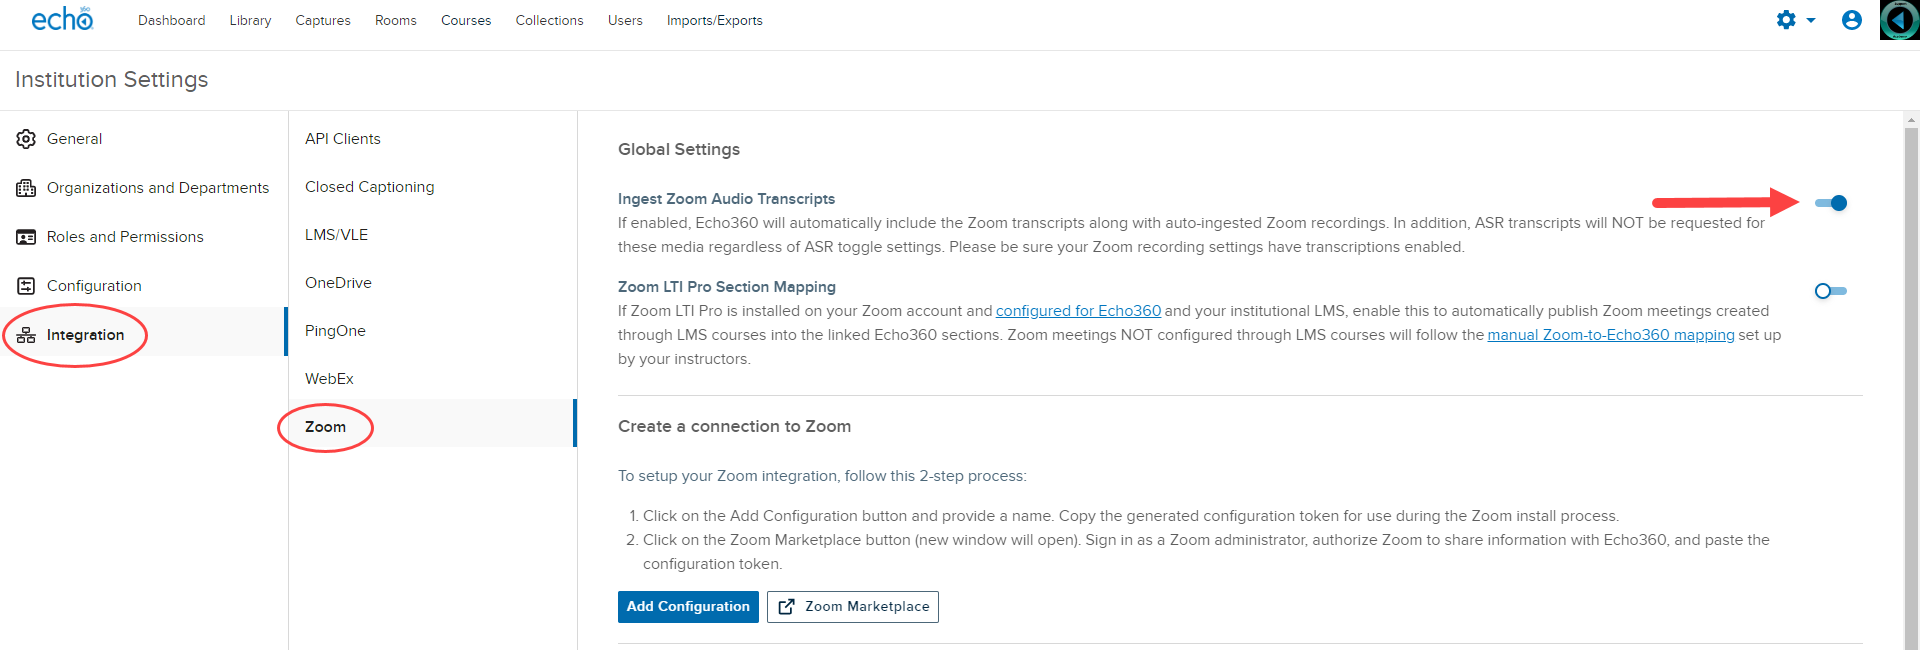 Zoom Integration page with navigation identified and Zoom transcript ingestion toggle shown for steps as described